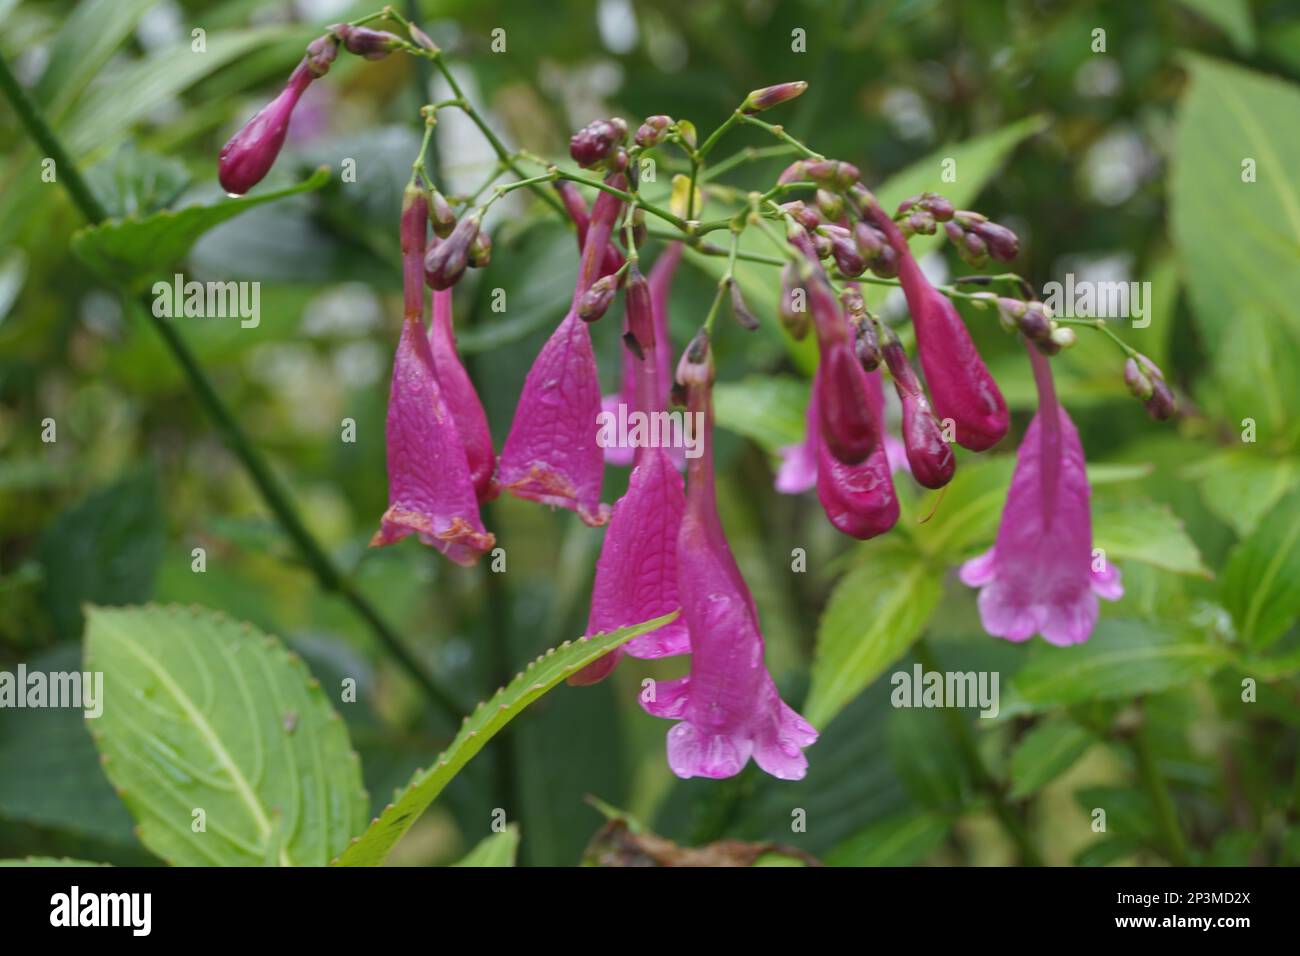 Strobilanthes cusia, also known as Assam indigo or Chinese rain bell, is a perennial flowering plant of the family Acanthaceae. Native to South Asia, Stock Photo